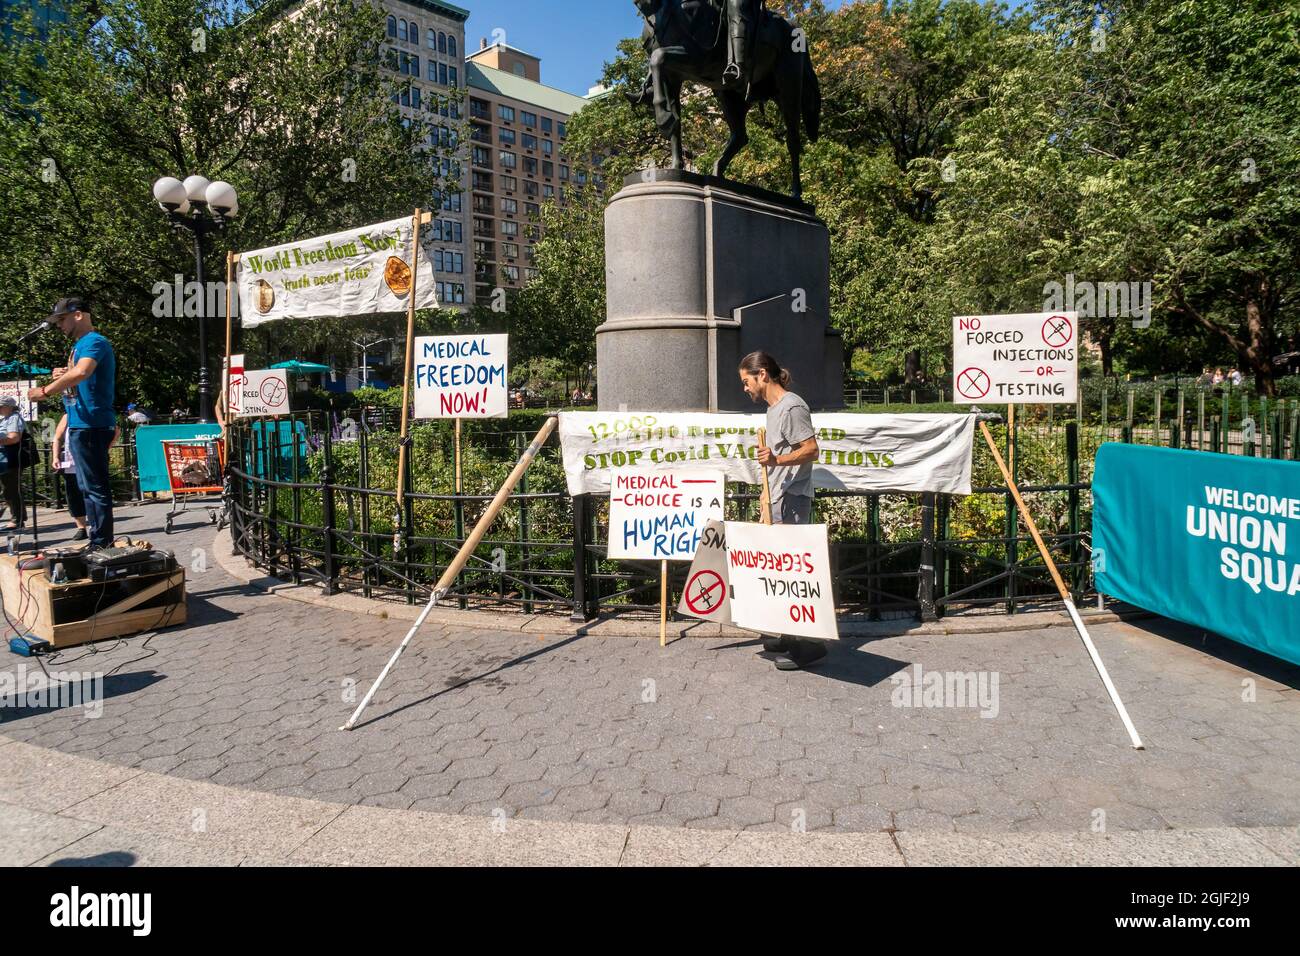 Protesters gather in Union Square Park in New York on Monday, September 6, 2021 to rally against the Covid-19 vaccination mandate in New York City. (© Richard B. Levine) Stock Photo